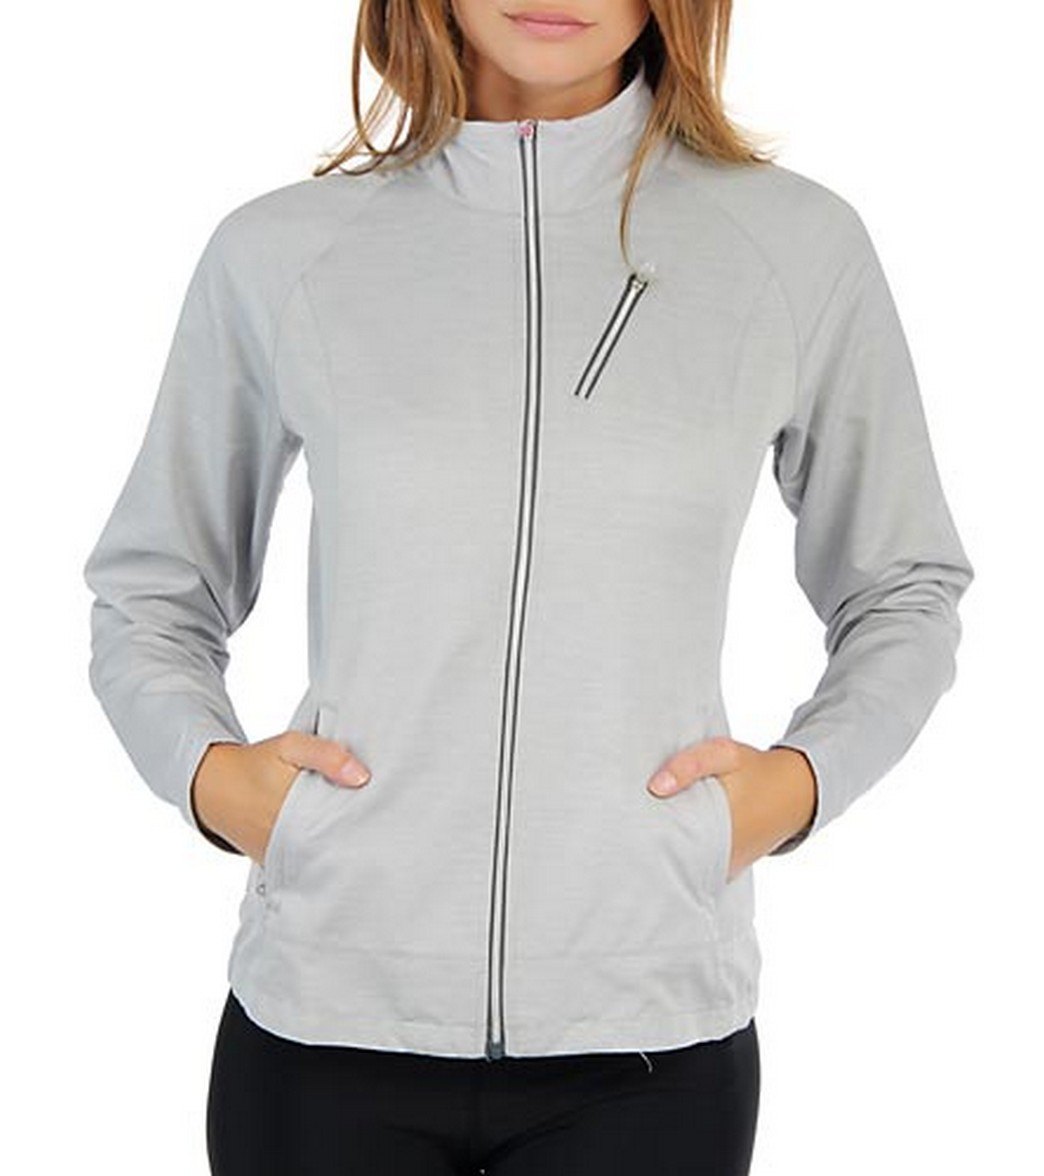 Moving Comfort Women's Sprint Running Jacket - Charcoal Heather 1X Polyester - Swimoutlet.com